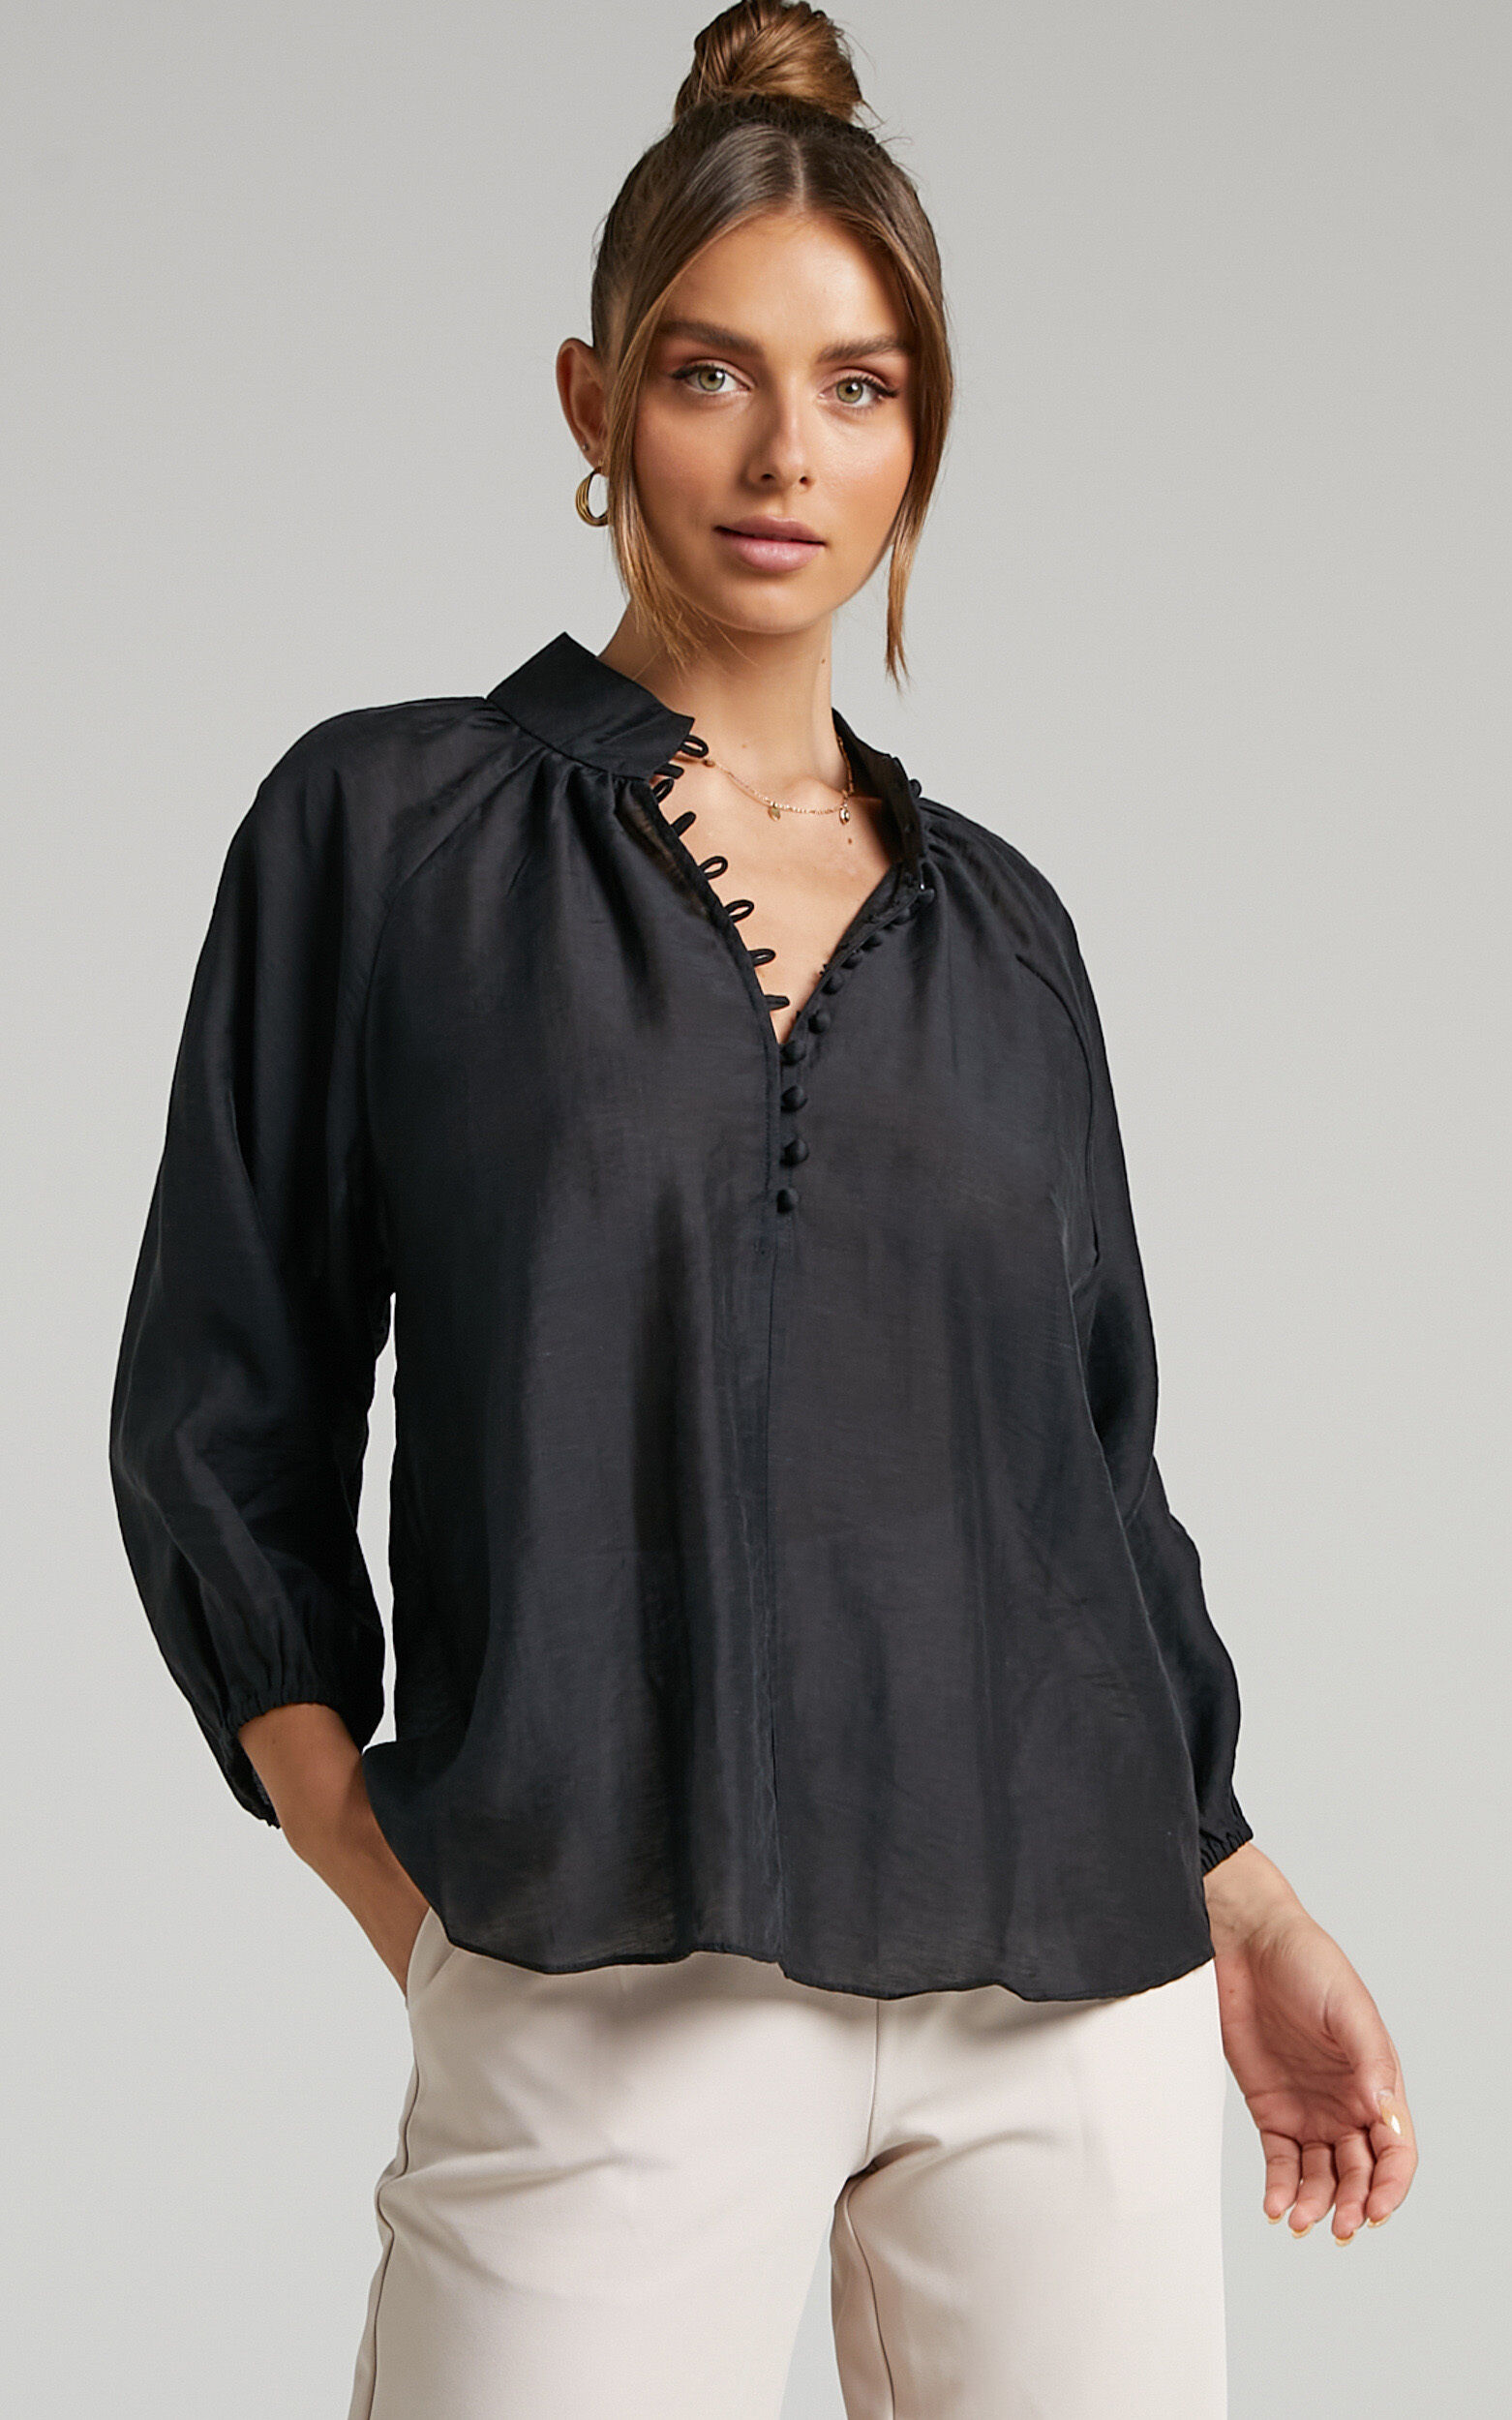 Aida High Neck Button Blouse in Black - 04, BLK1, super-hi-res image number null